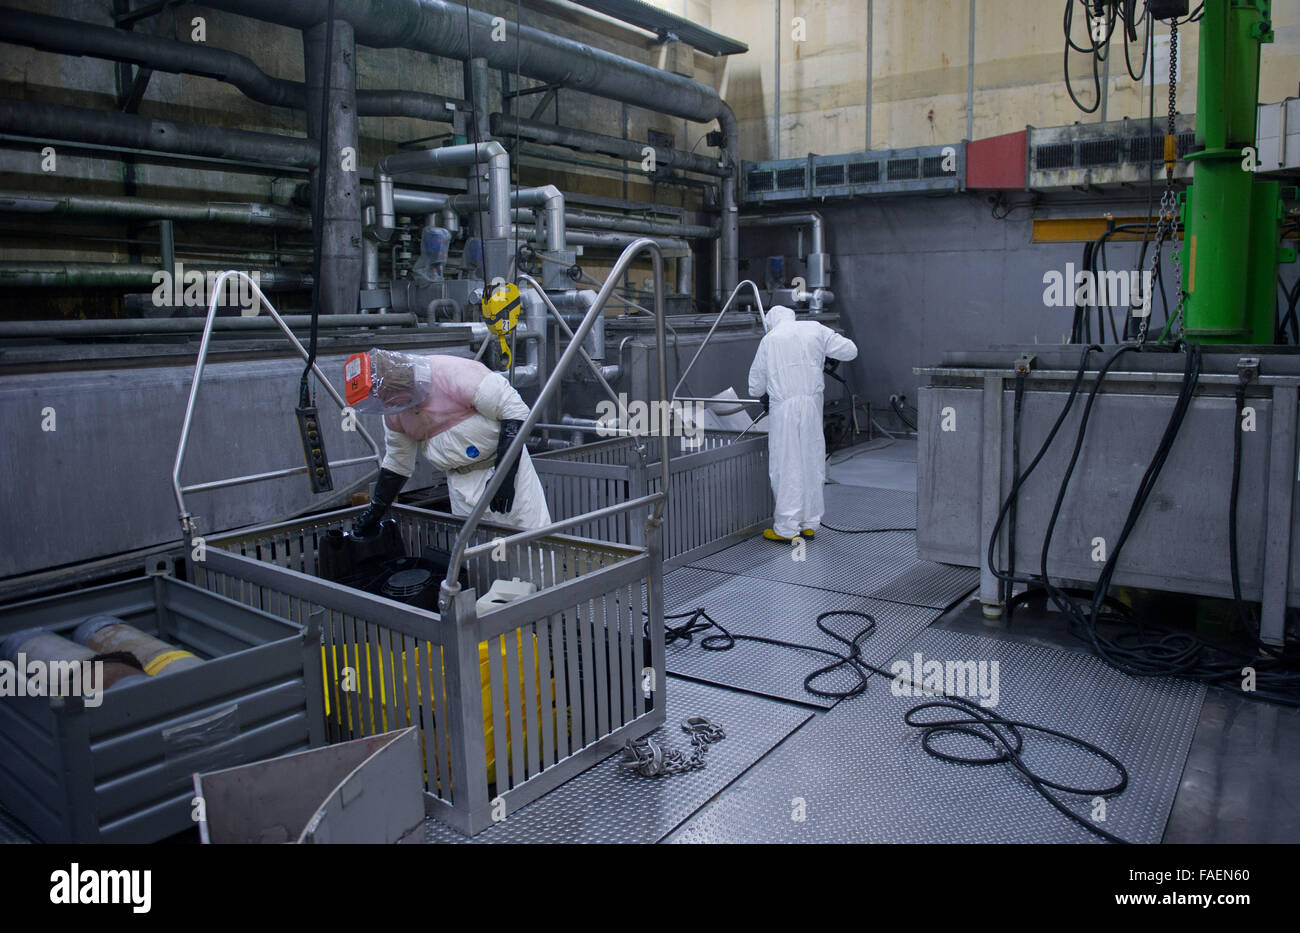 Lubmin, Germany. 16th Dec, 2015. Employees of Energiewerke Nord GmbH (EWN) clean a component of the former Bruno Leuschner nuclear power plant, in the conditioning and decontamination facility in Lubmin, Germany, 16 December 2015. The federally owned company Energiewerke Nord (EWN) will expedite the dismantling of the nuclear power plants decommissioned in 1990 located in Lubmin and Rheinsberg respectively. Photo: STEFAN SAUER/dpa/Alamy Live News Stock Photo